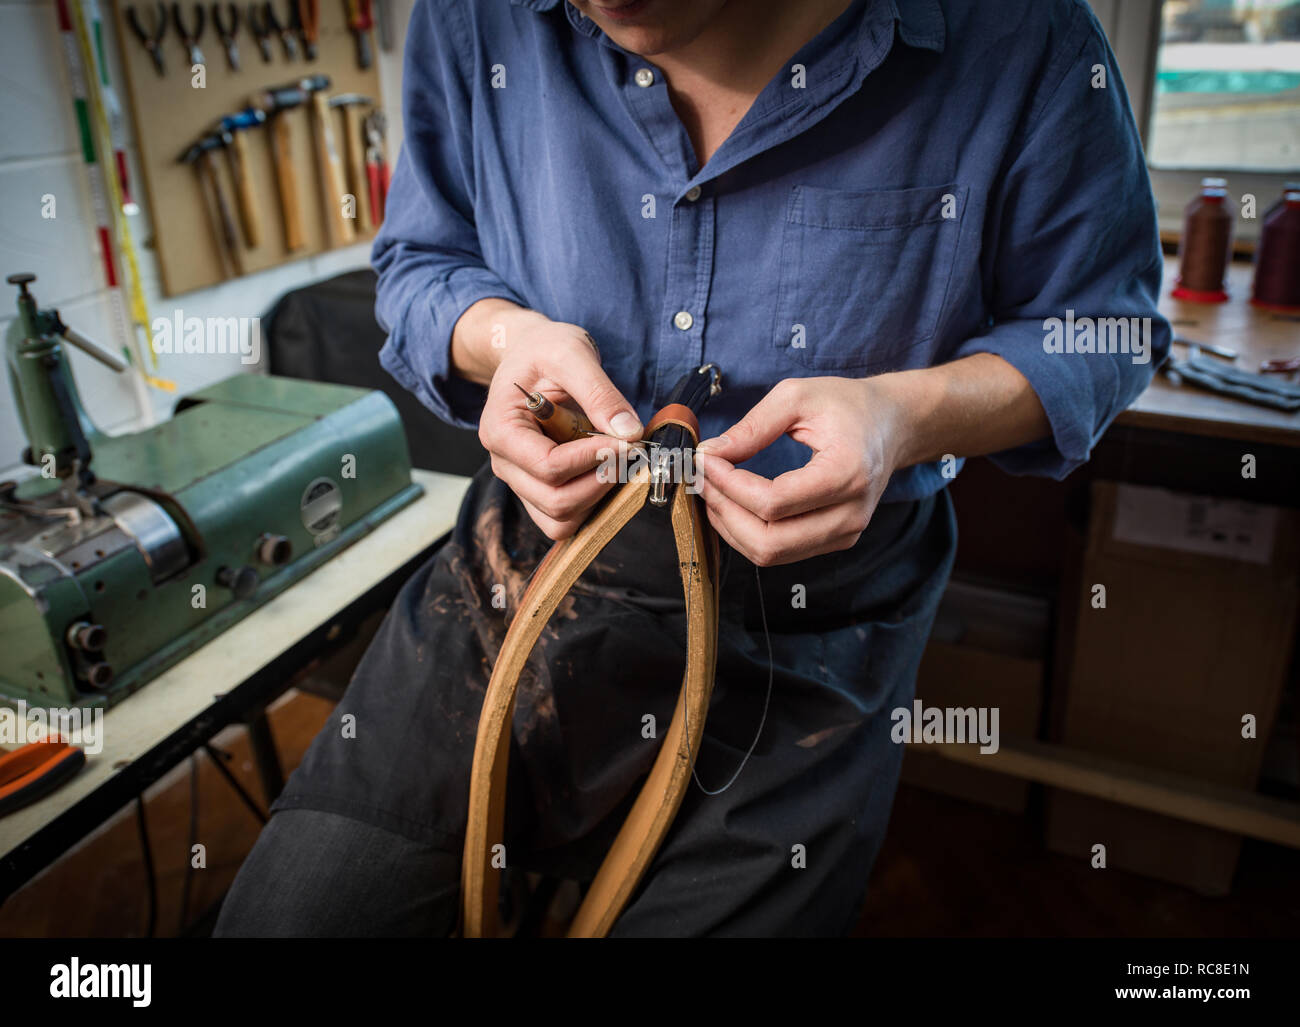 Leatherworker stitching leather in workshop, mid section Stock Photo